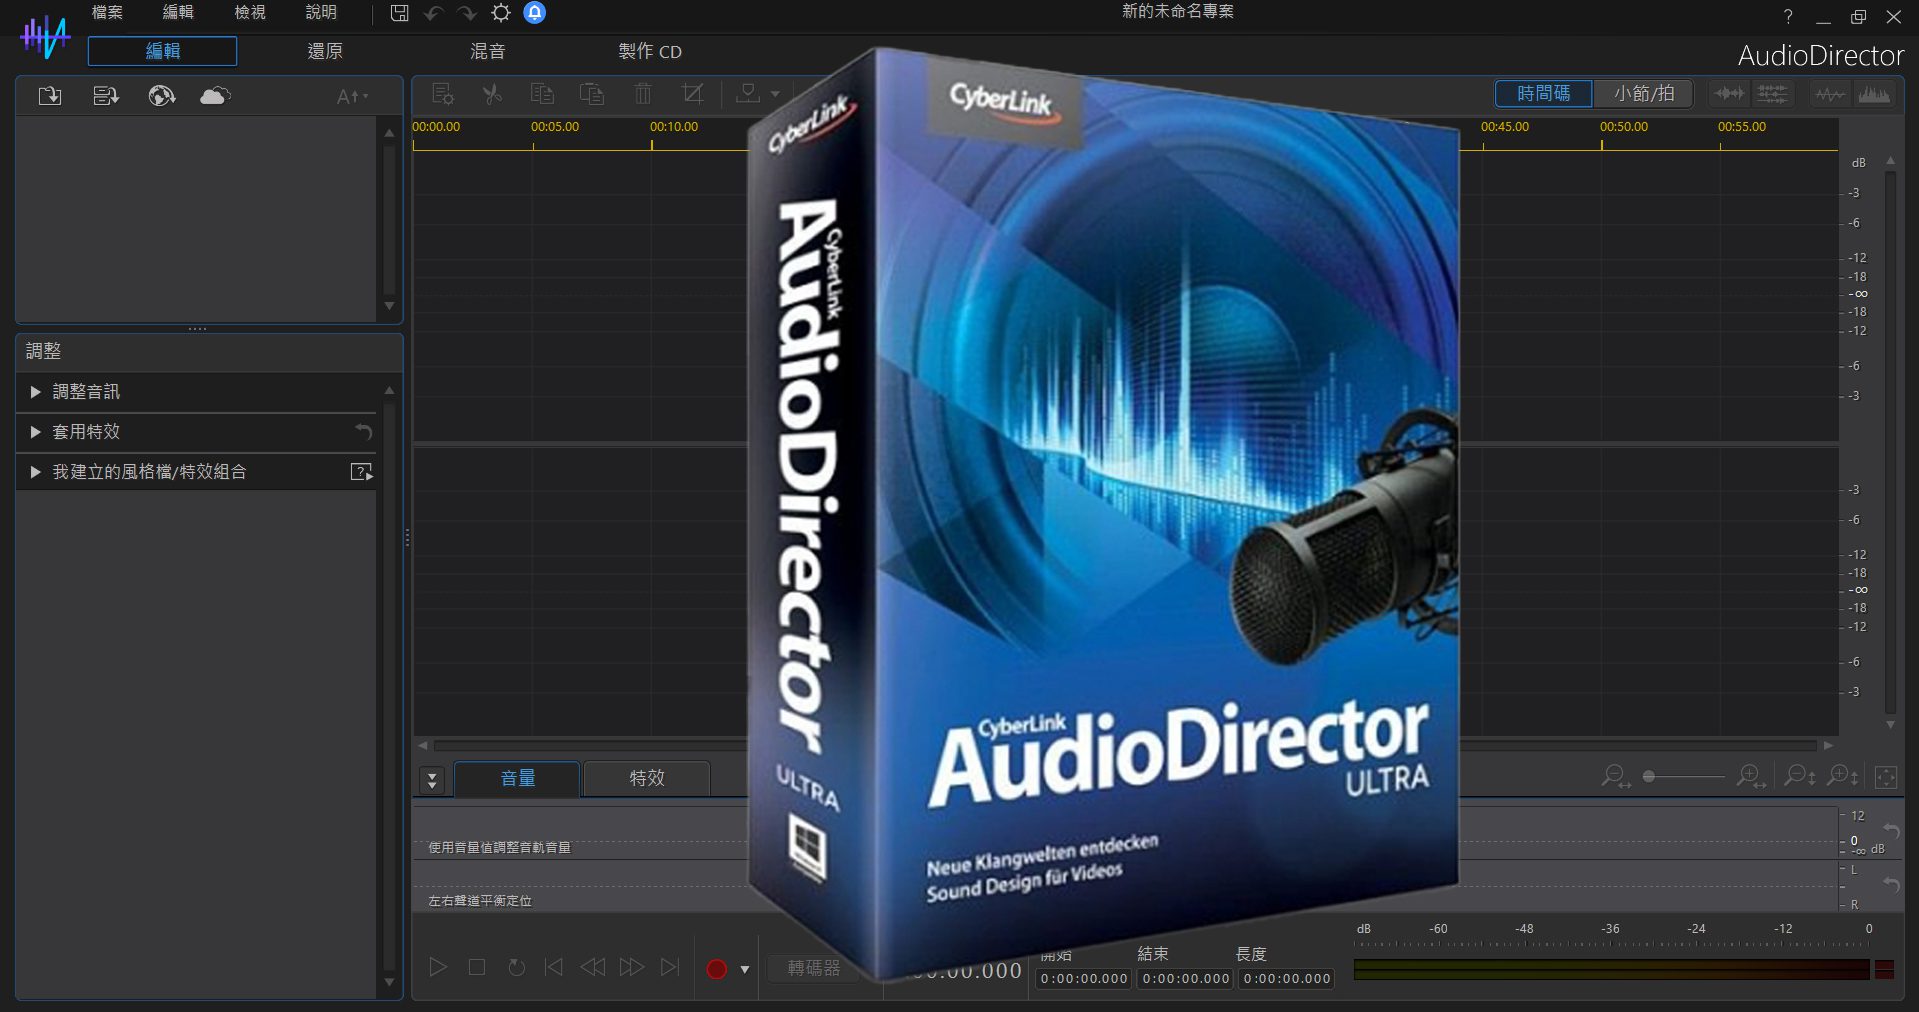 Download CyberLink AudioDirector Ultra Full Version